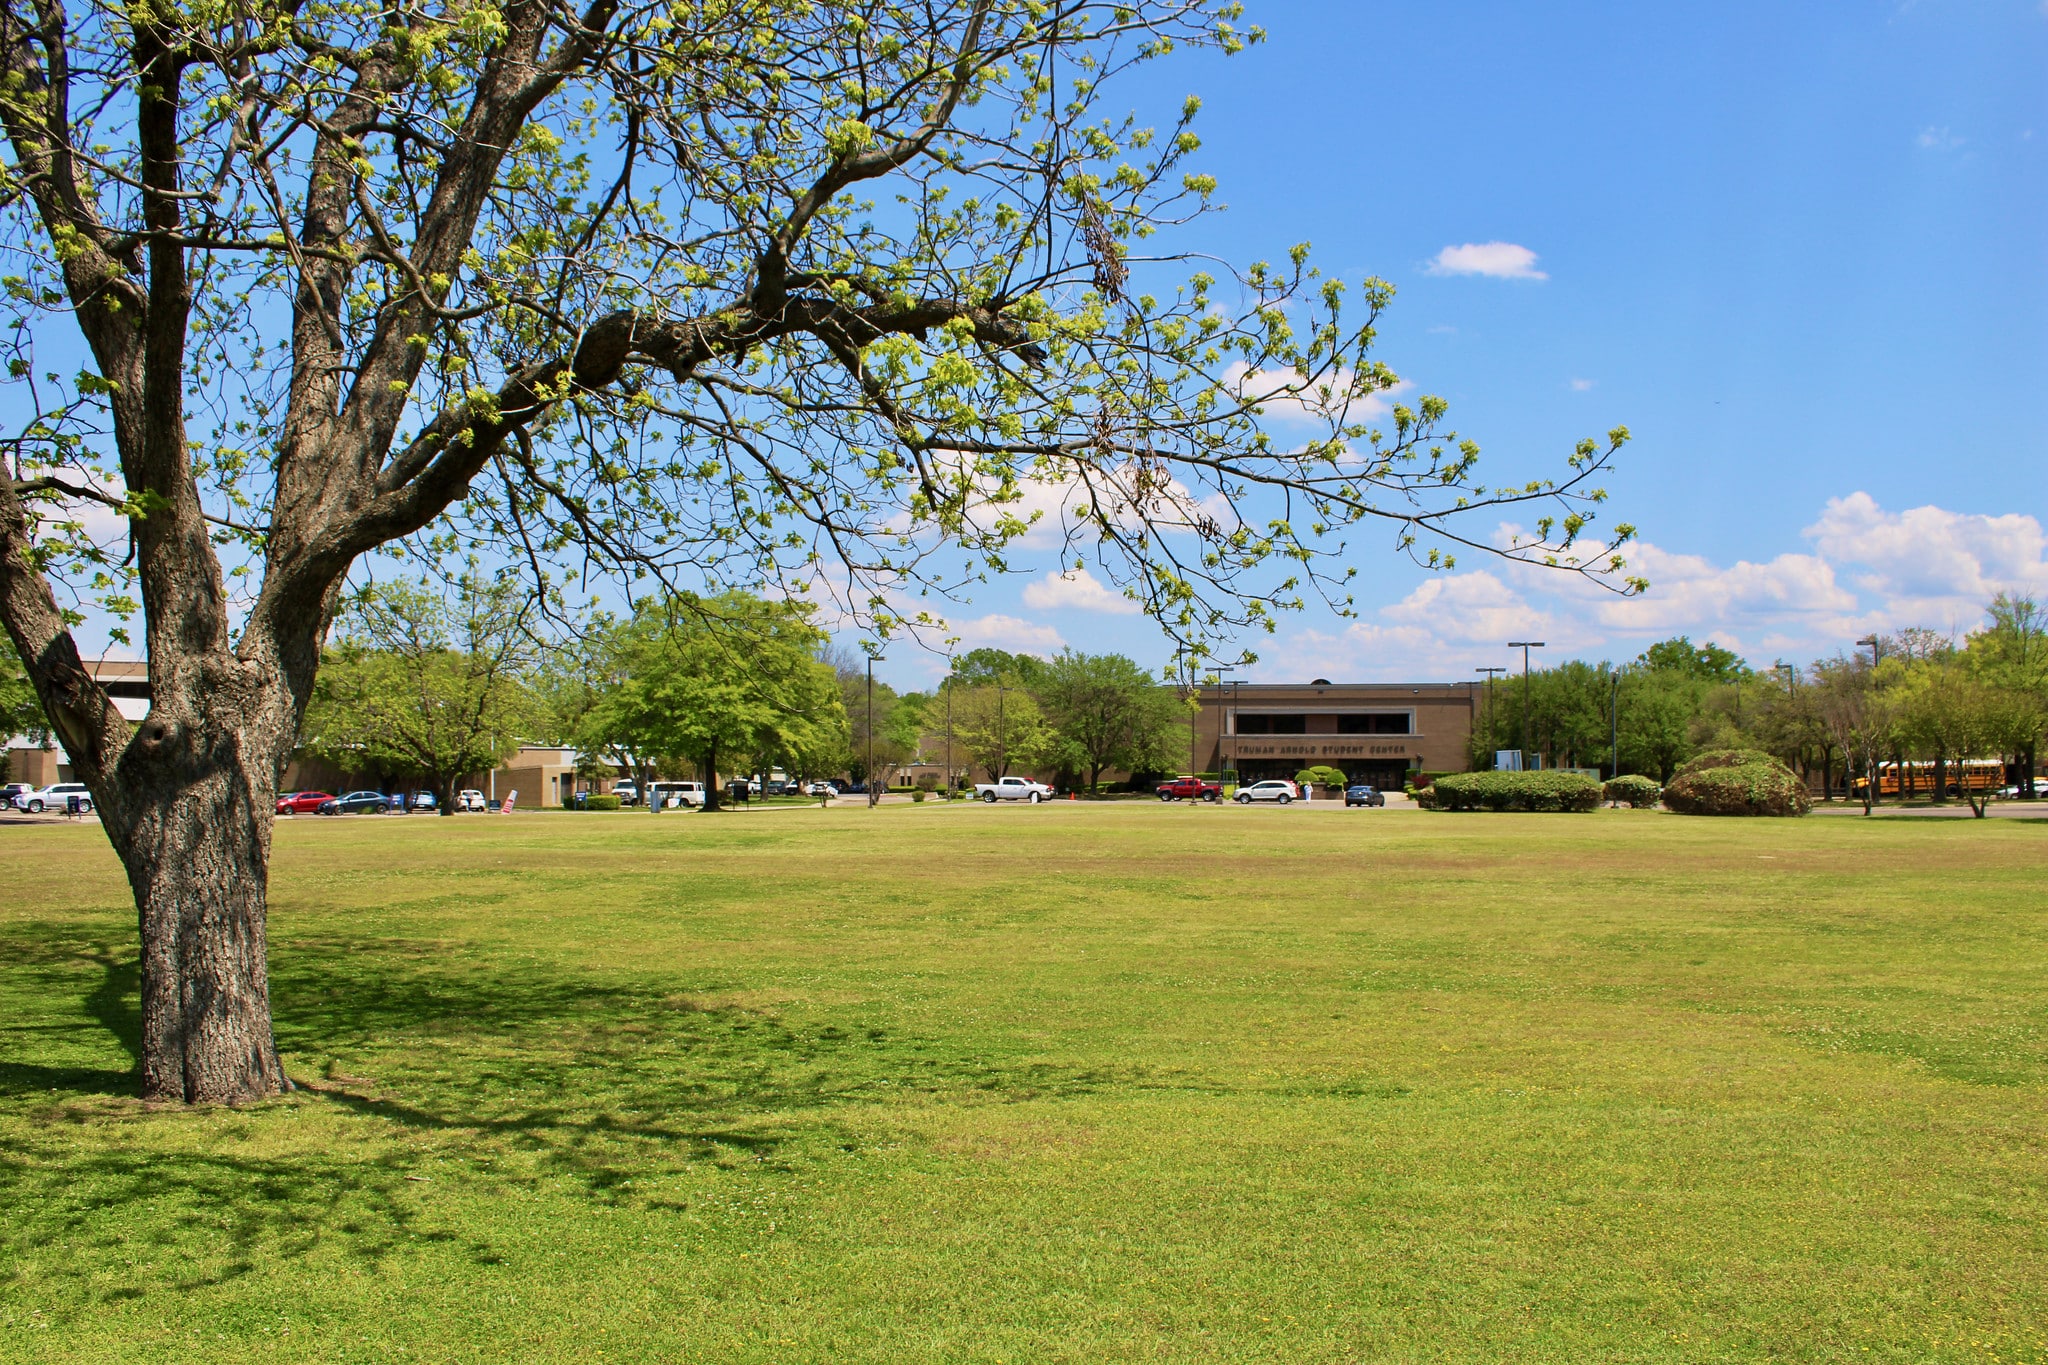 Campus lawn towards the Student Center